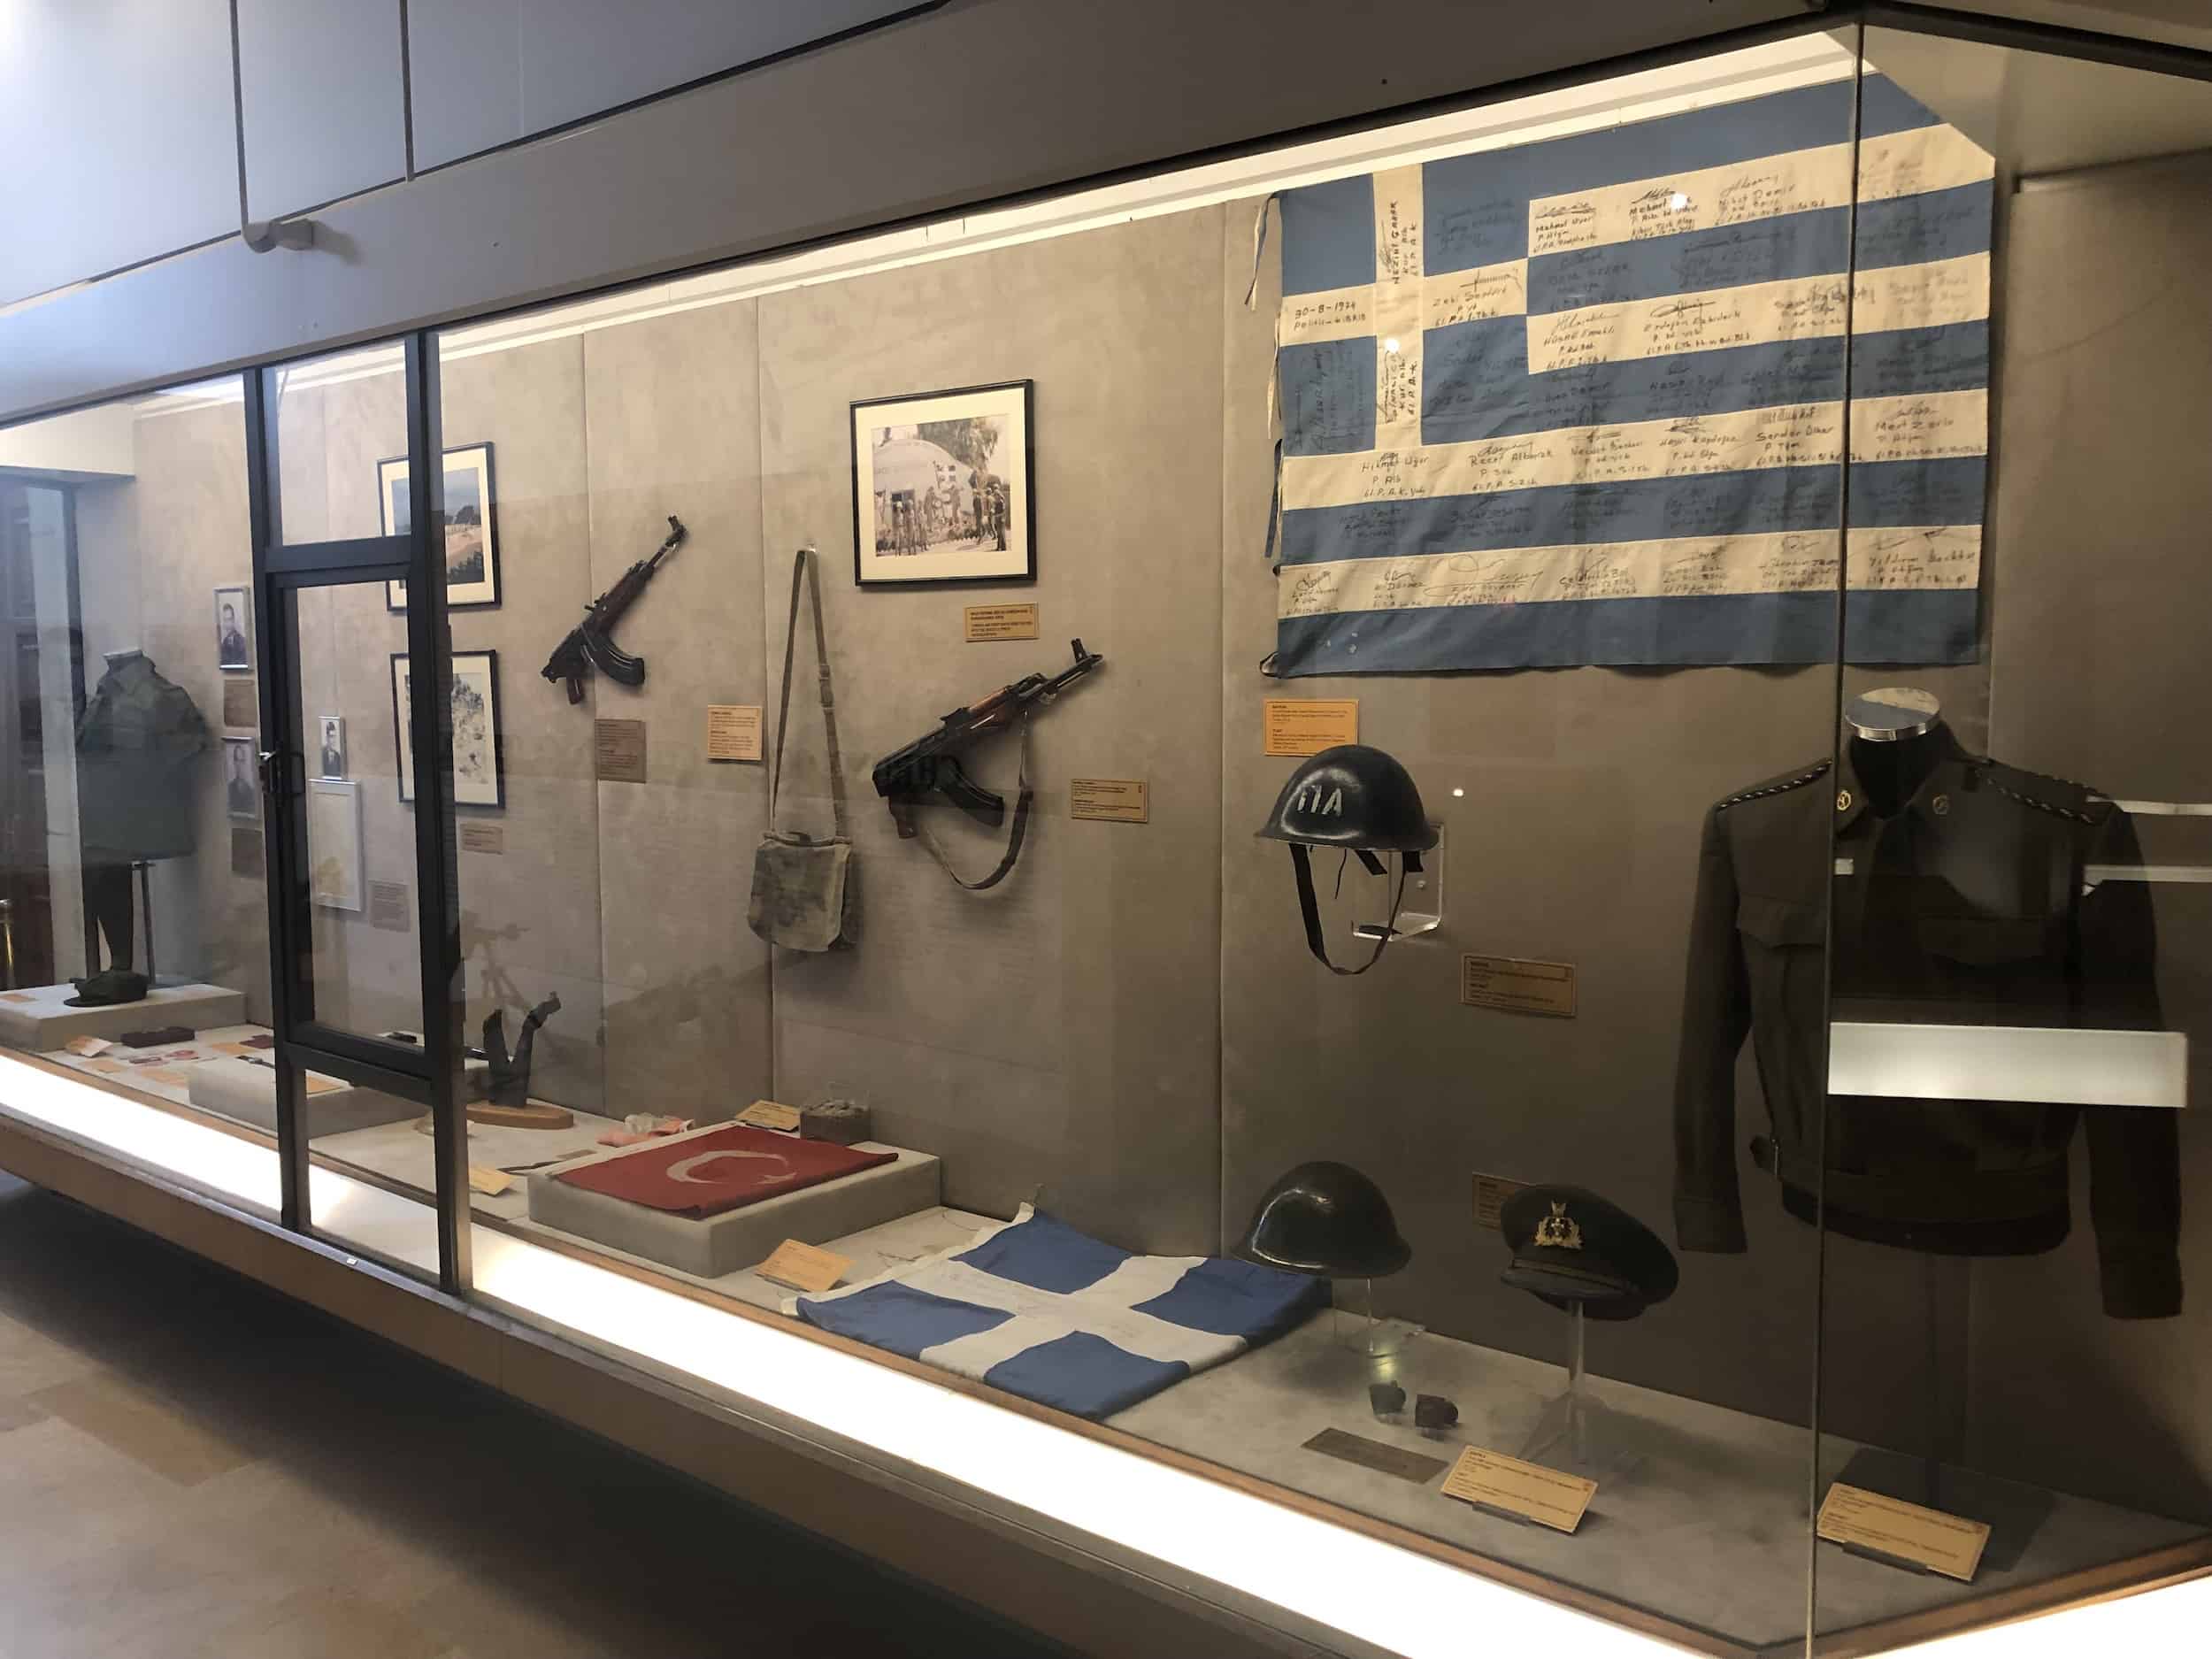 Items used during the Turkish invasion of Cyprus